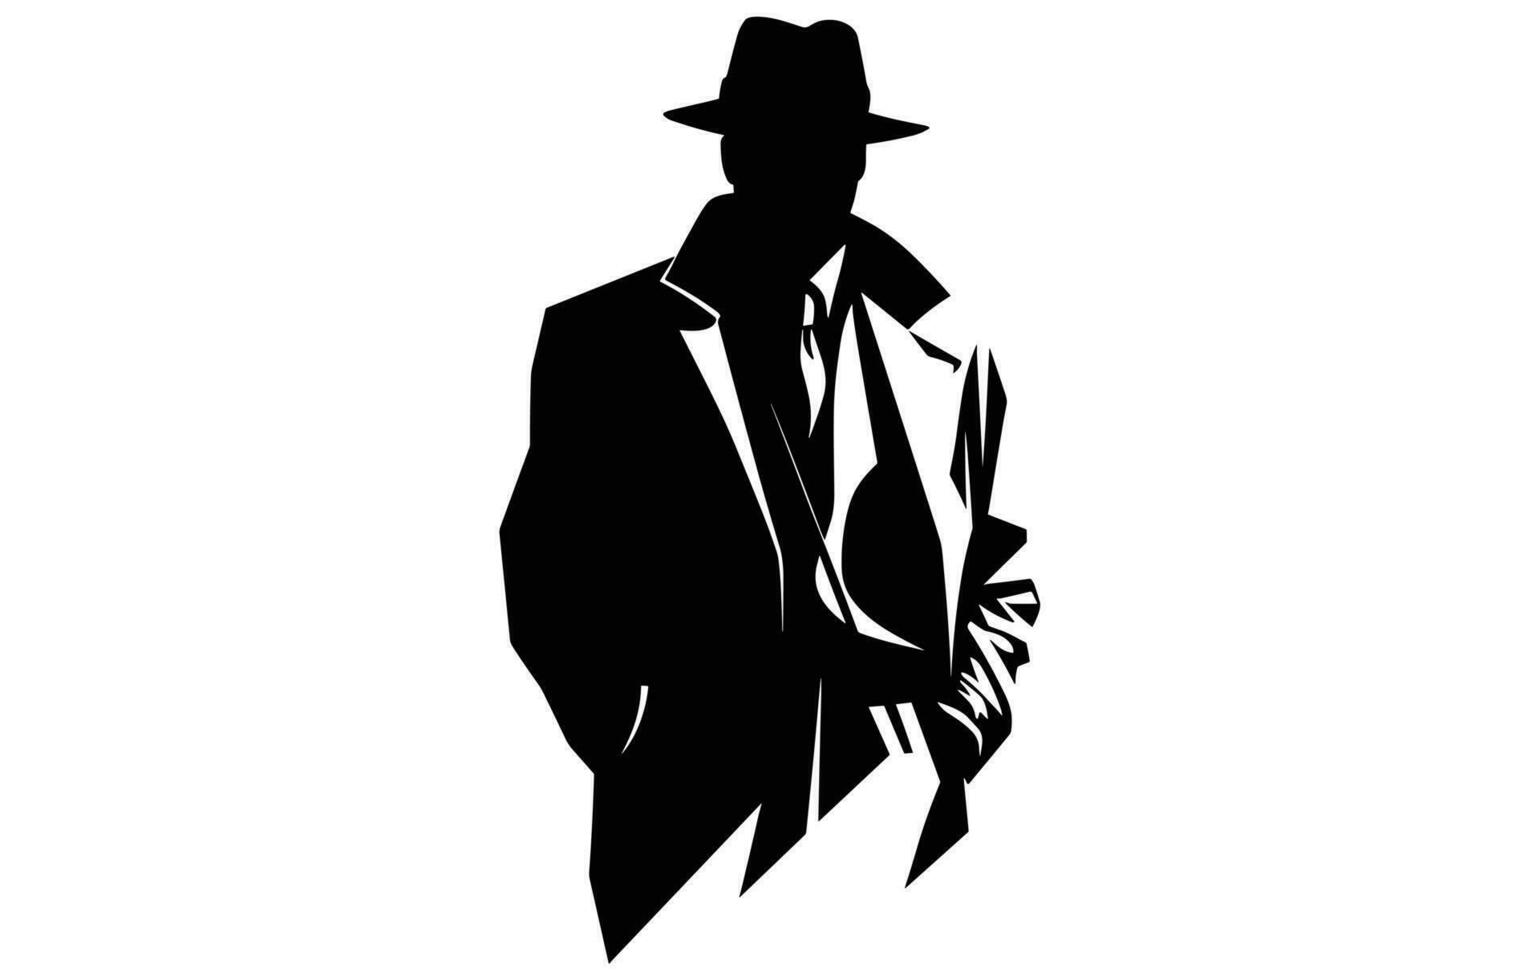 detective logo, silhouette of man wear hat and coat vector